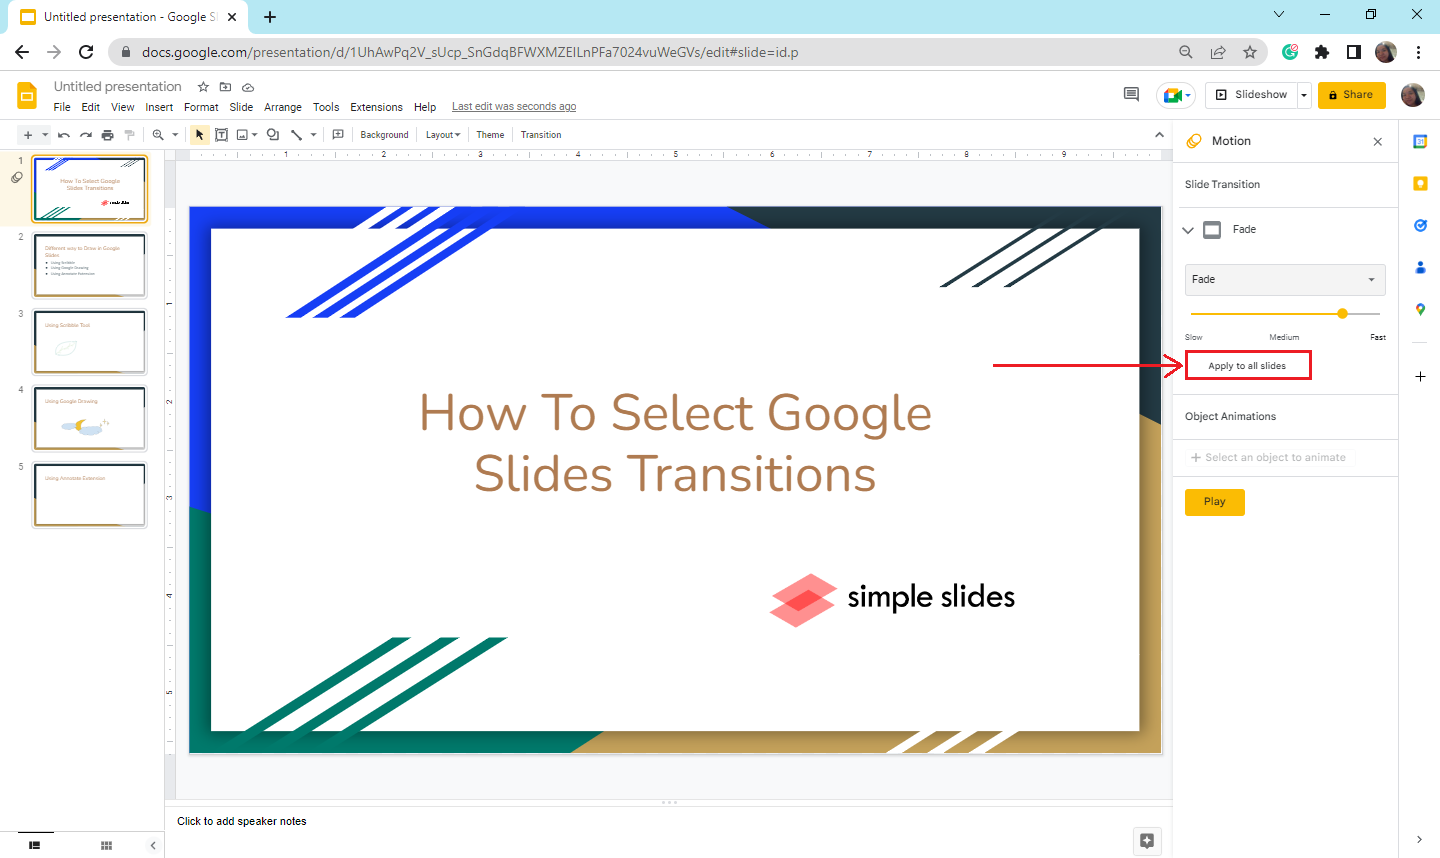 If you want to put the same transition to all of your slides, click "Apply to all slides"